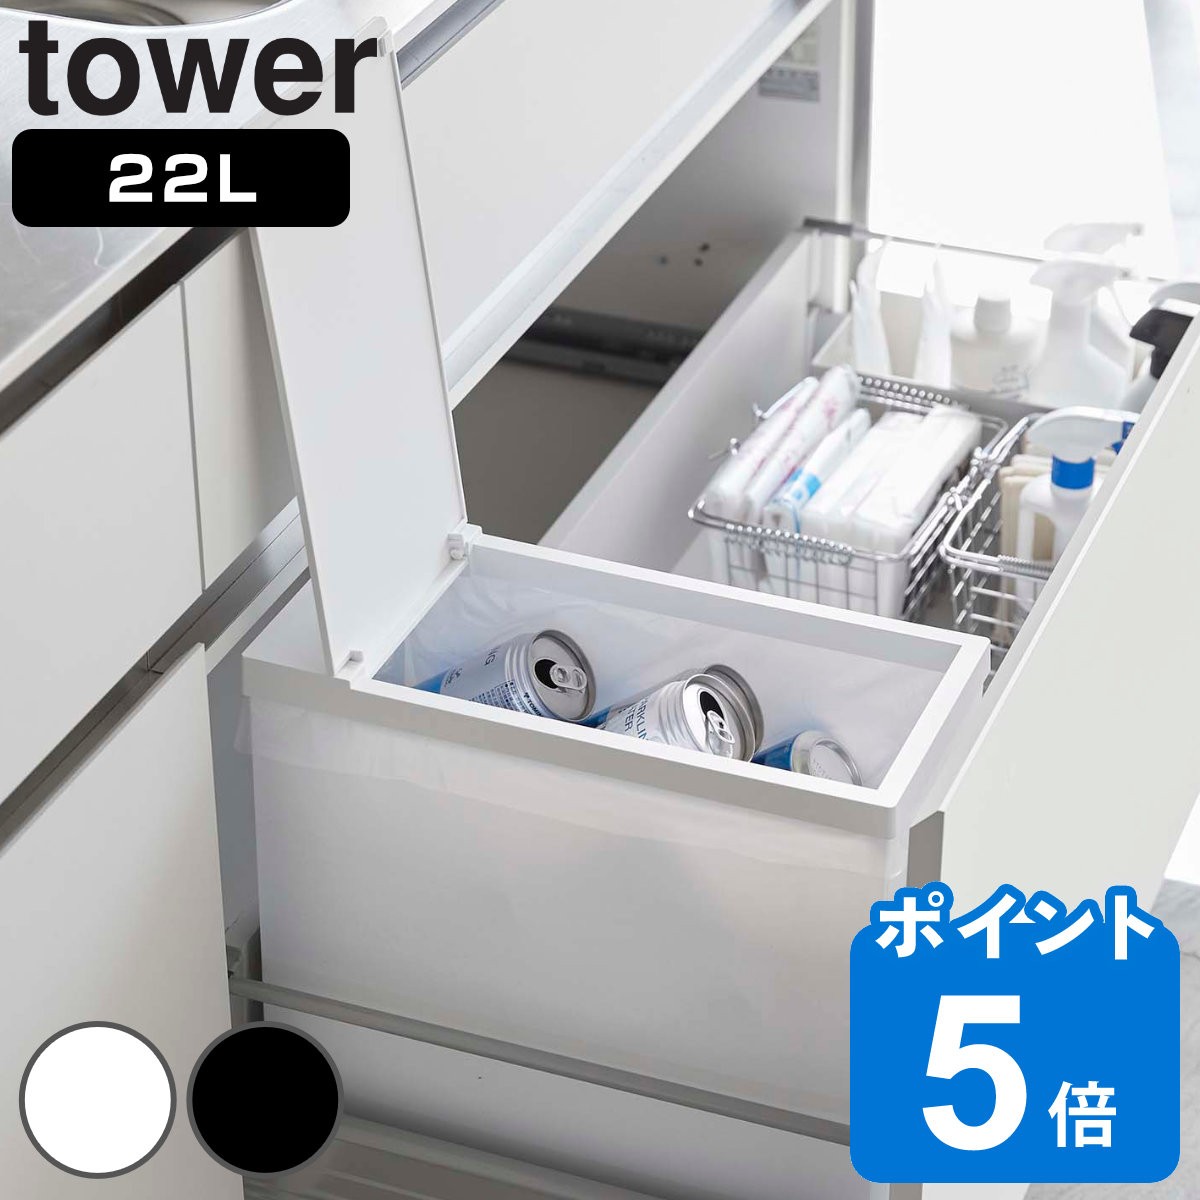 tower S~ 22L VN ӂt